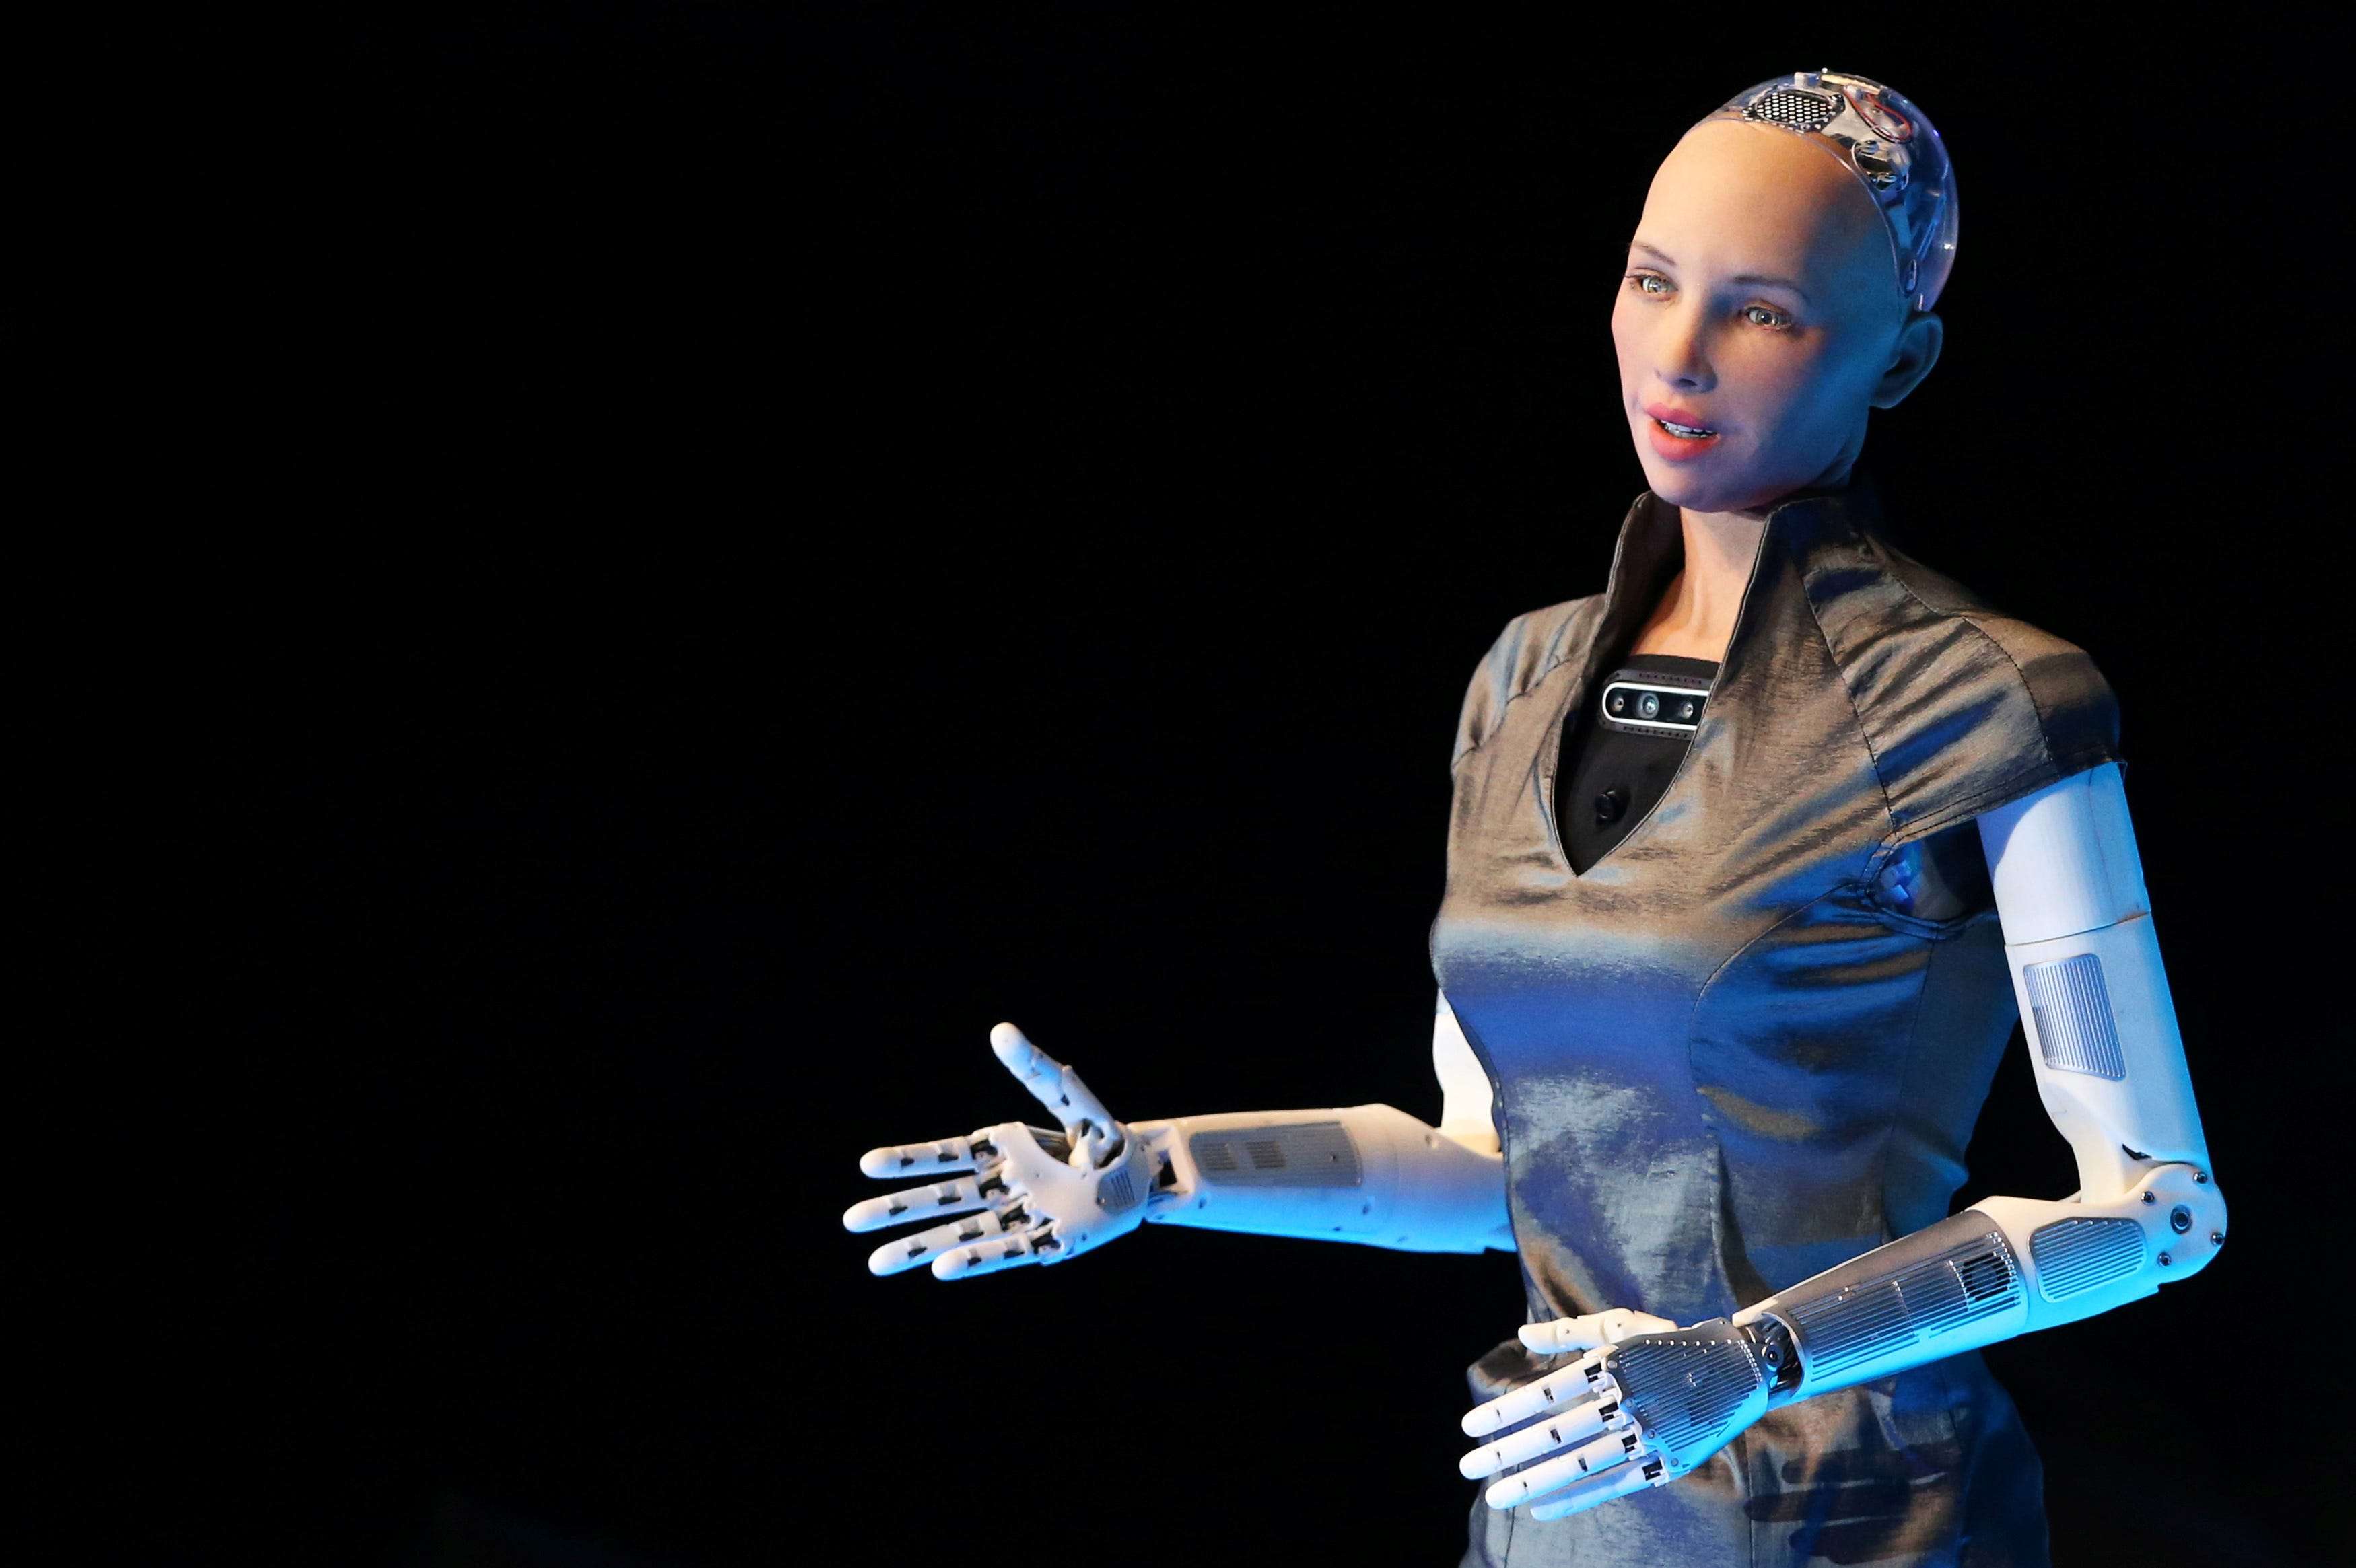 Sophia, everyone's favourite humanoid robot, is being prepared for mass